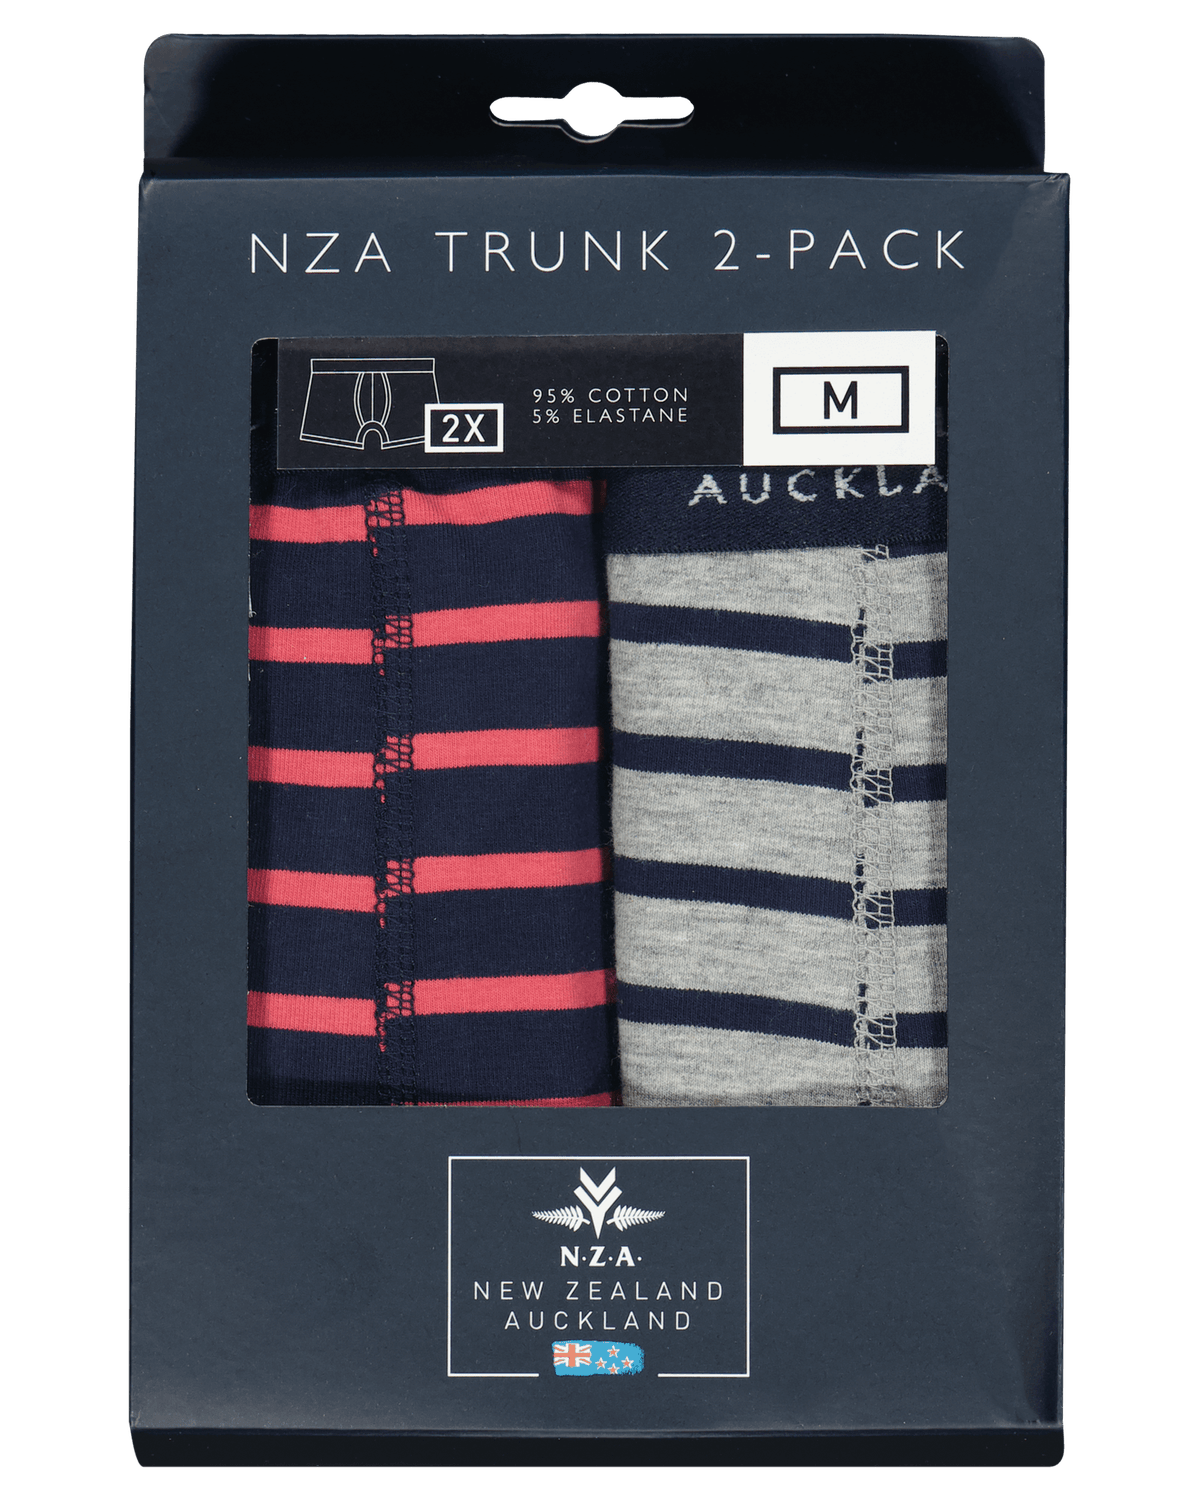 2 pack socks - Mixed color